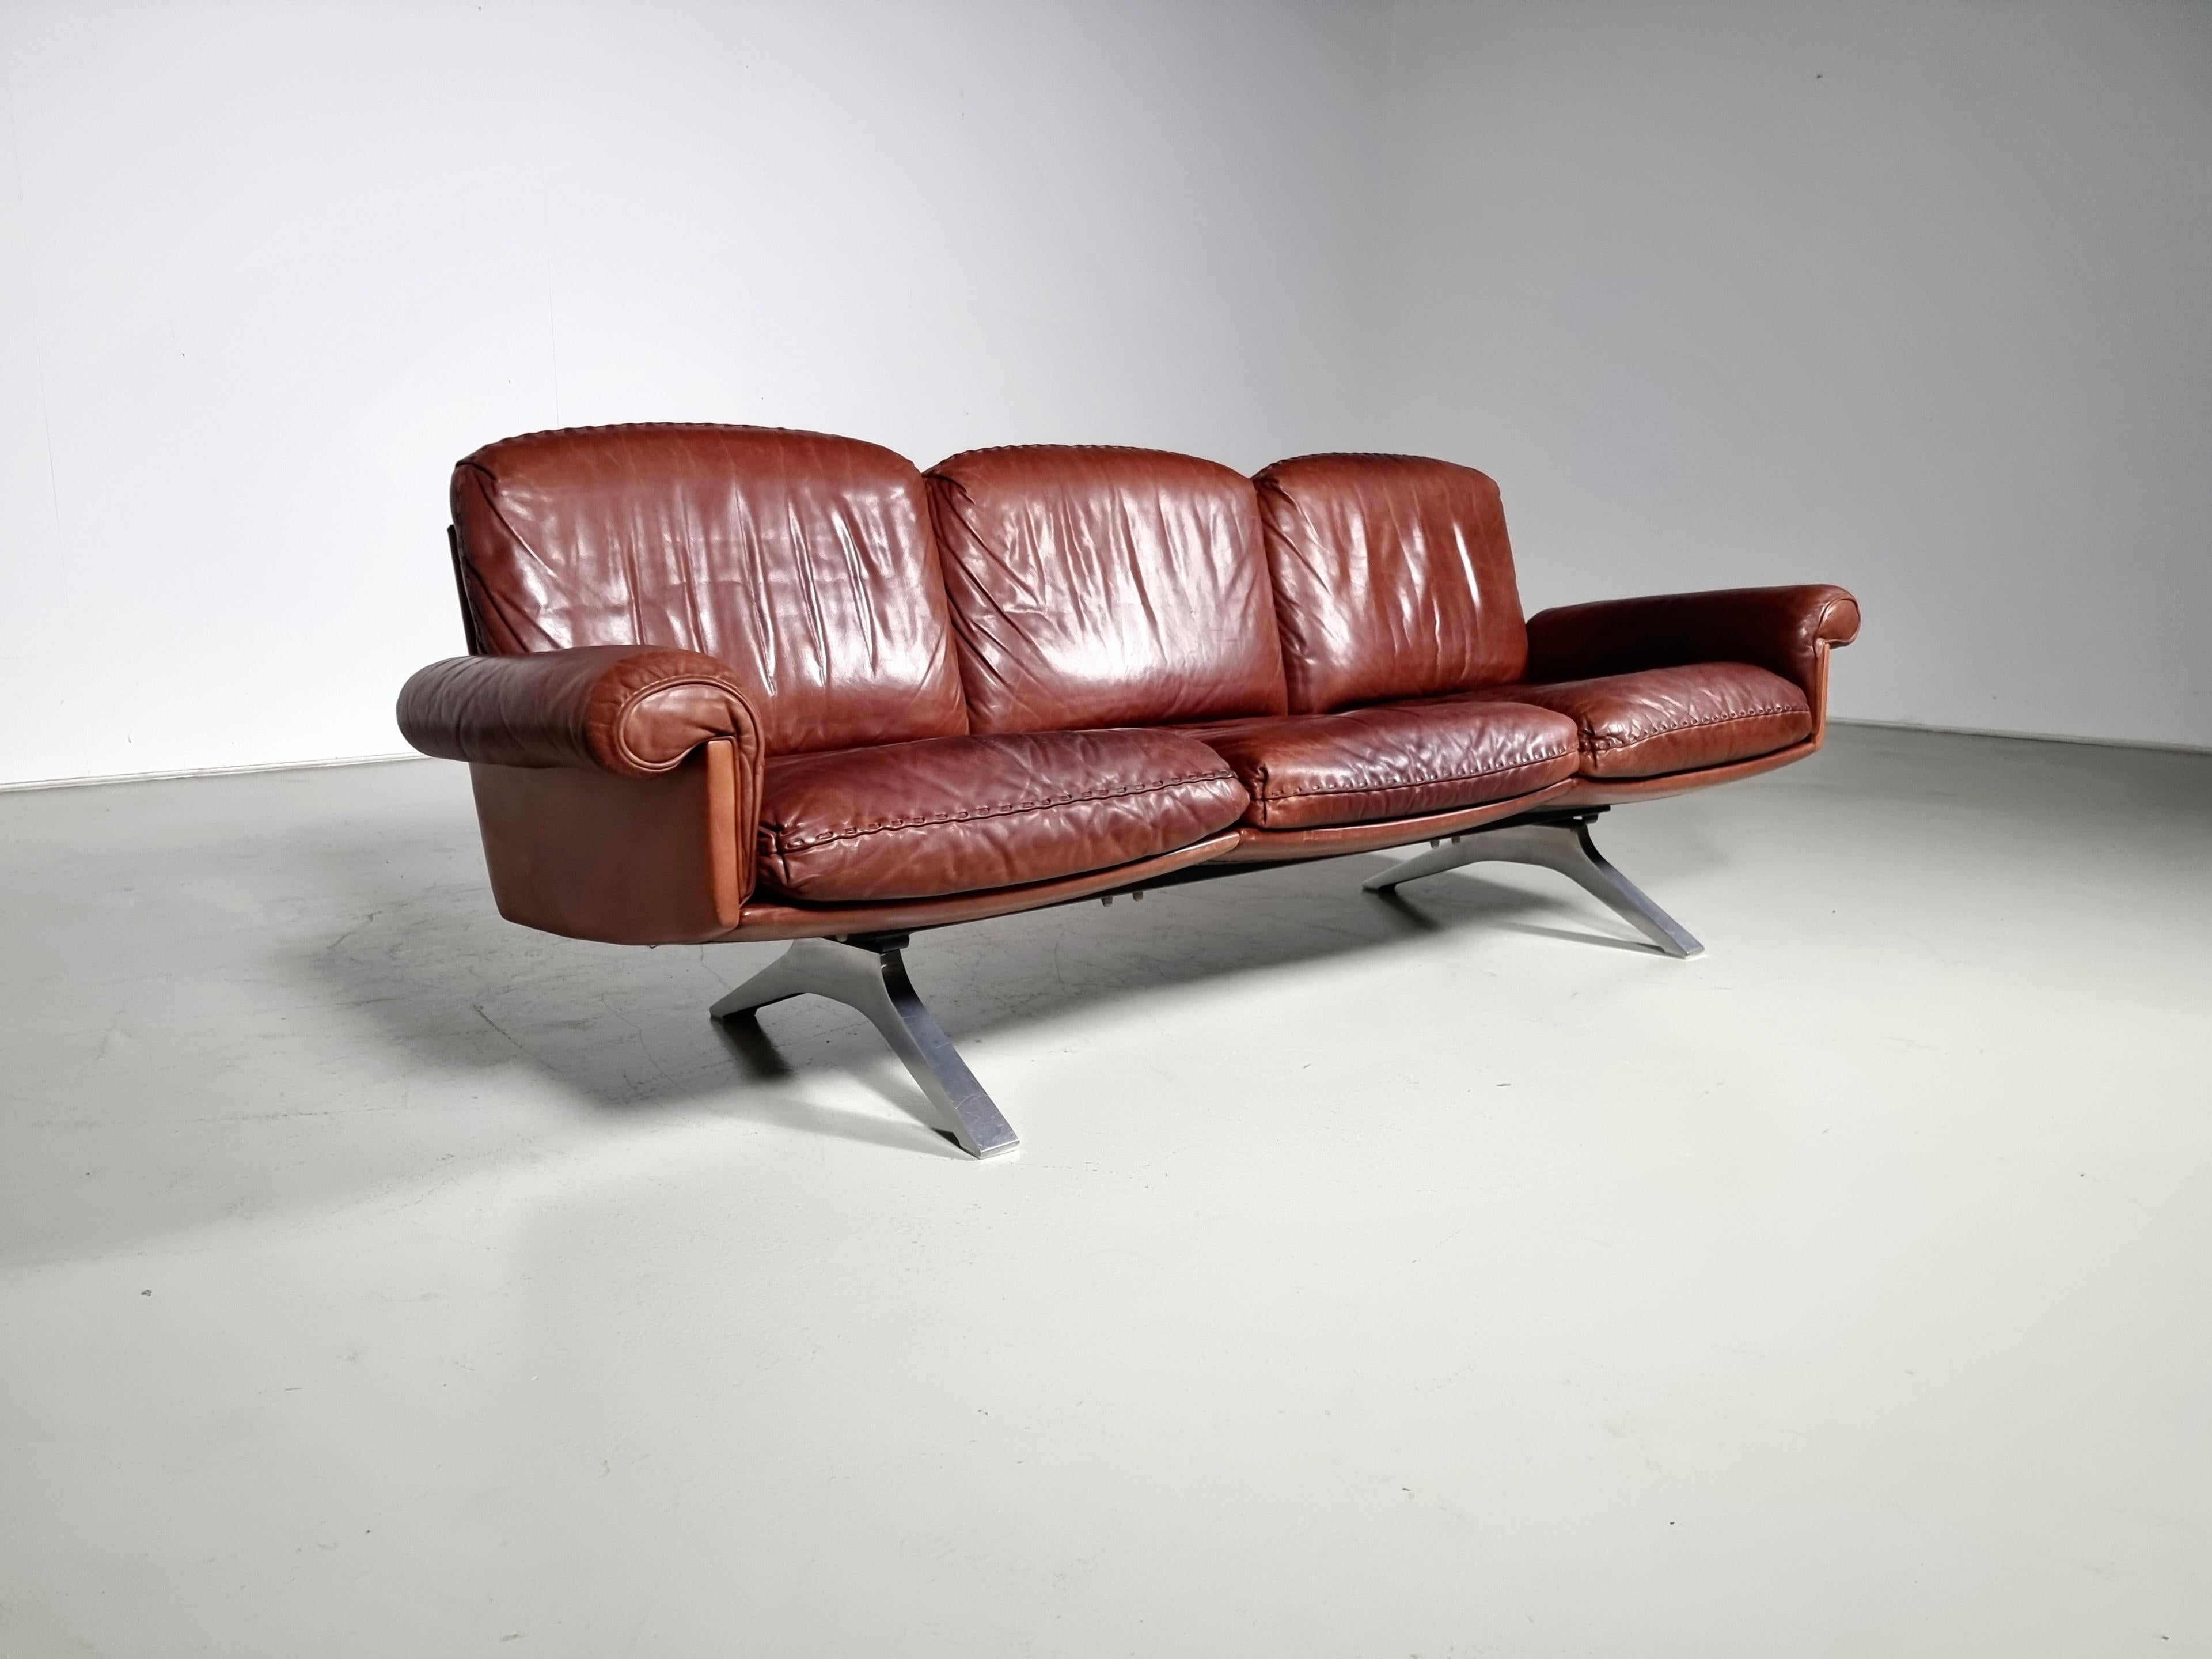 De Sede ''DS-31'' 3-seater sofa, leather, chrome-plated metal, Switzerland, 1970s

A comfortable sitting experience is guaranteed by means of the deep seat and curved armrests. Also, the thick leather seating cushions provide an ultimate level of